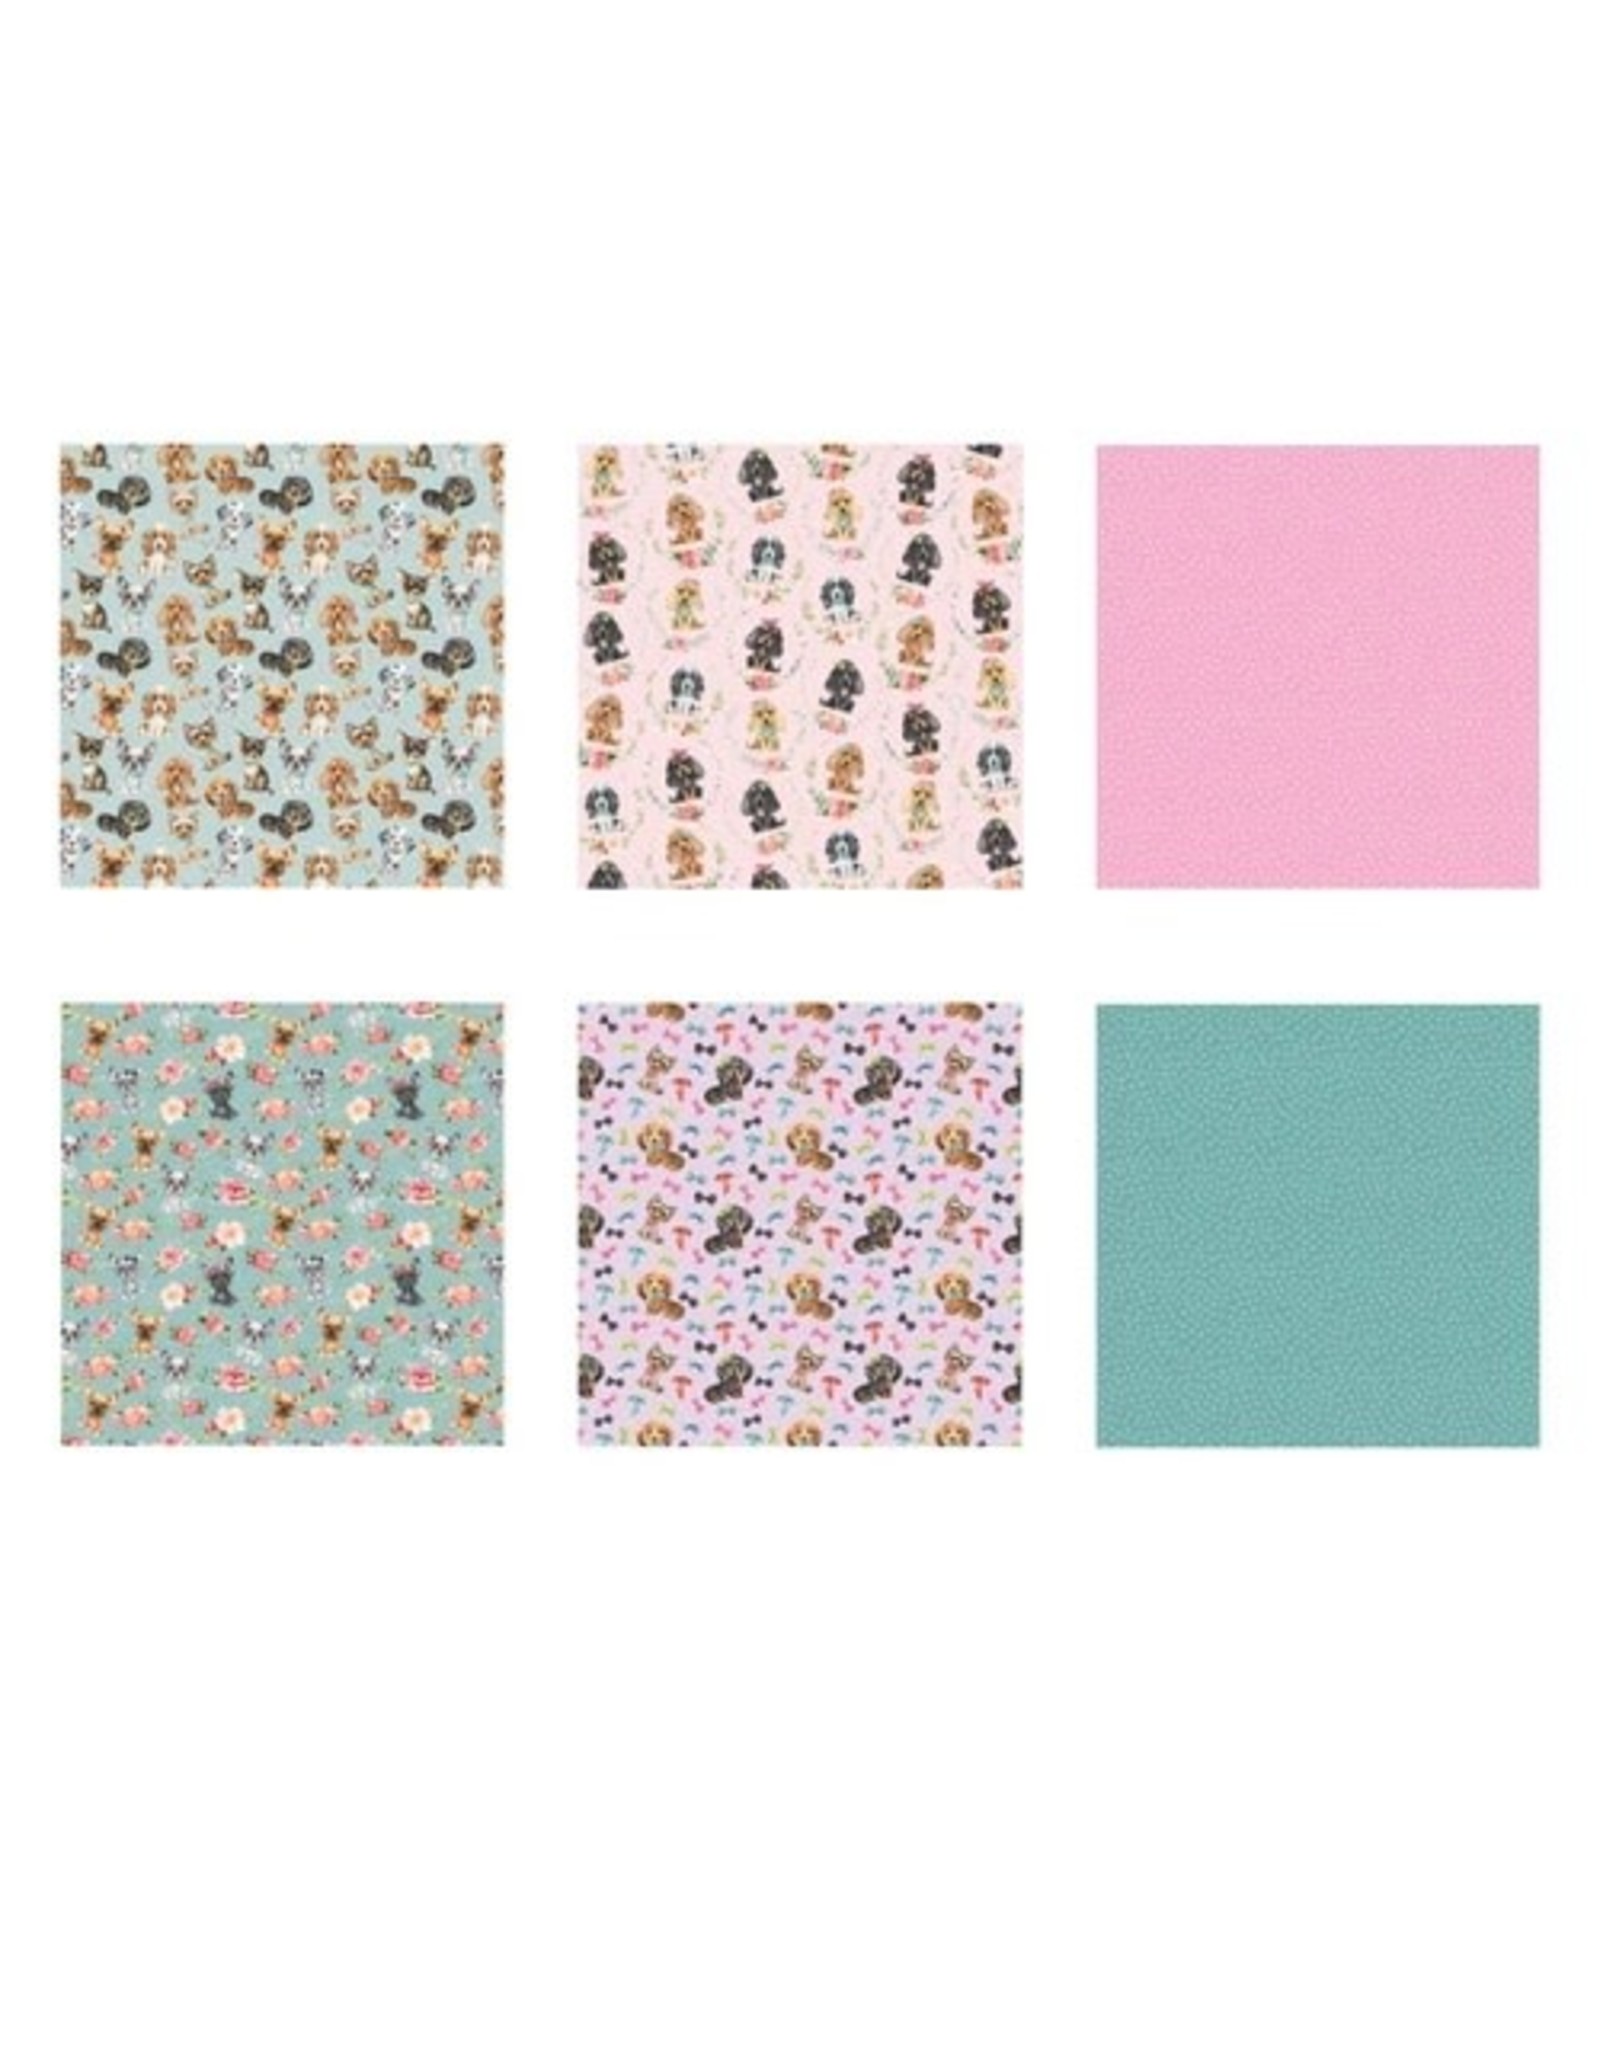 CREATIVE WORLD OF CRAFTS THE PAPER BOUTIQUE PAMPERED POOCH DECORATIVE PAPER PAD 36 SHEETS